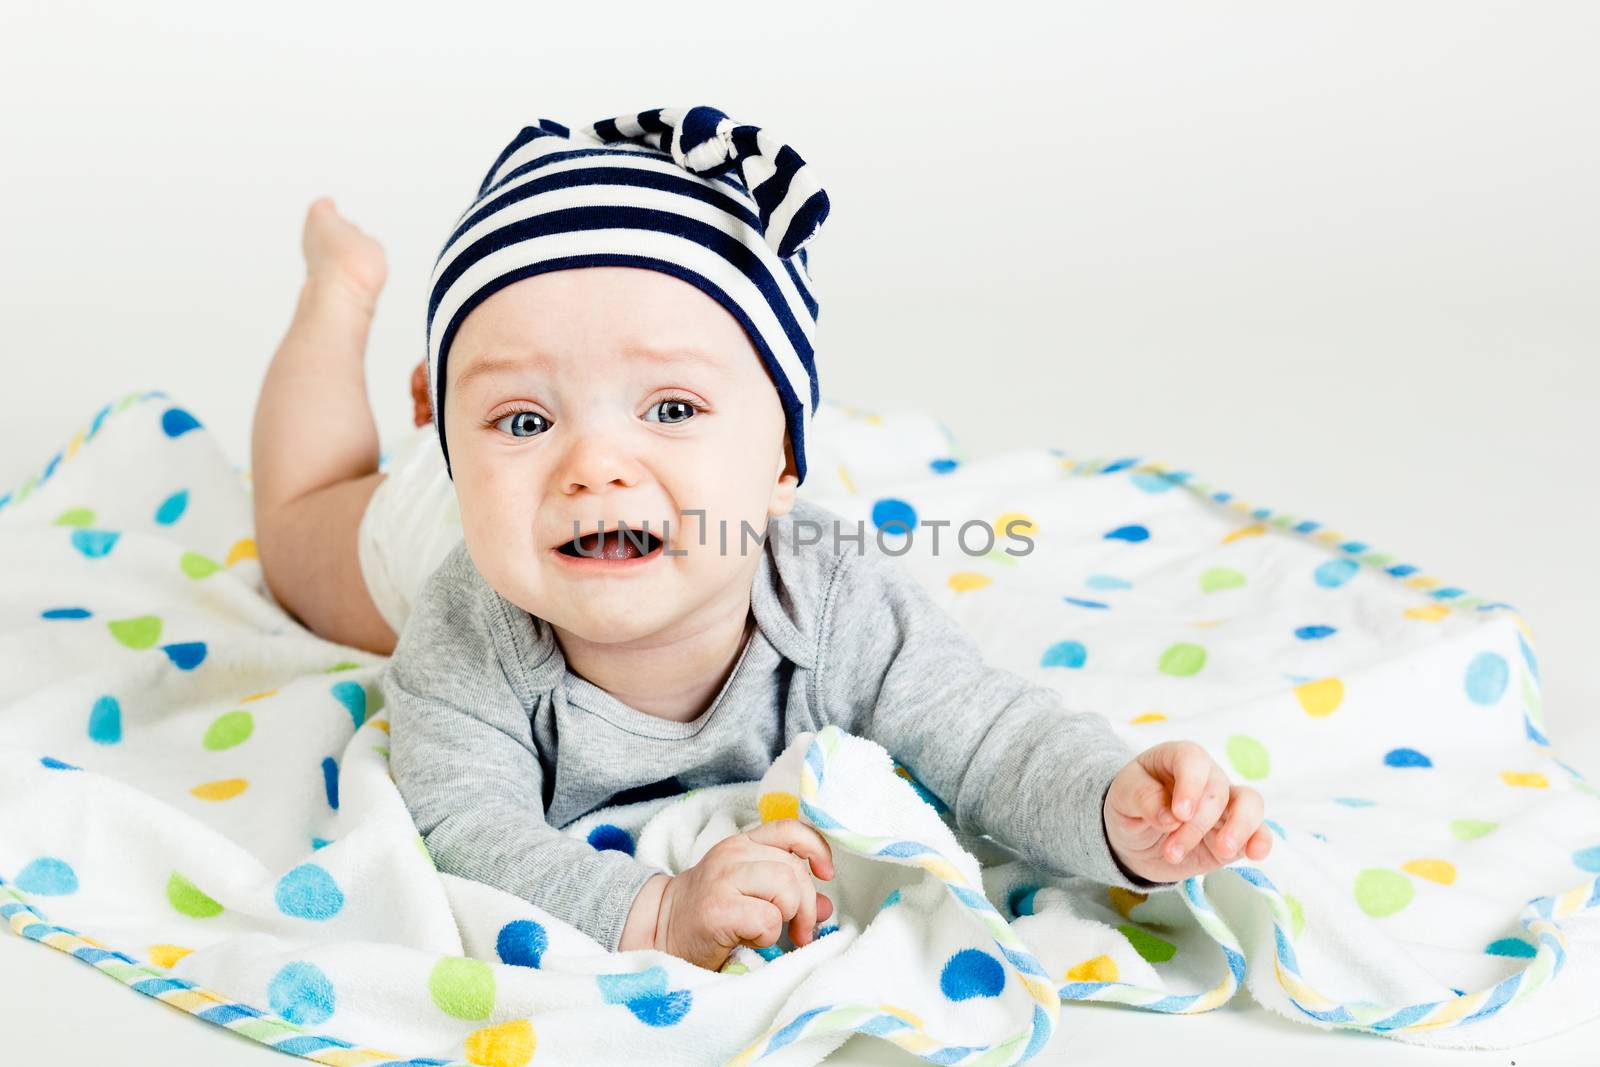 Adorable baby screaming in a striped cap. studio photo